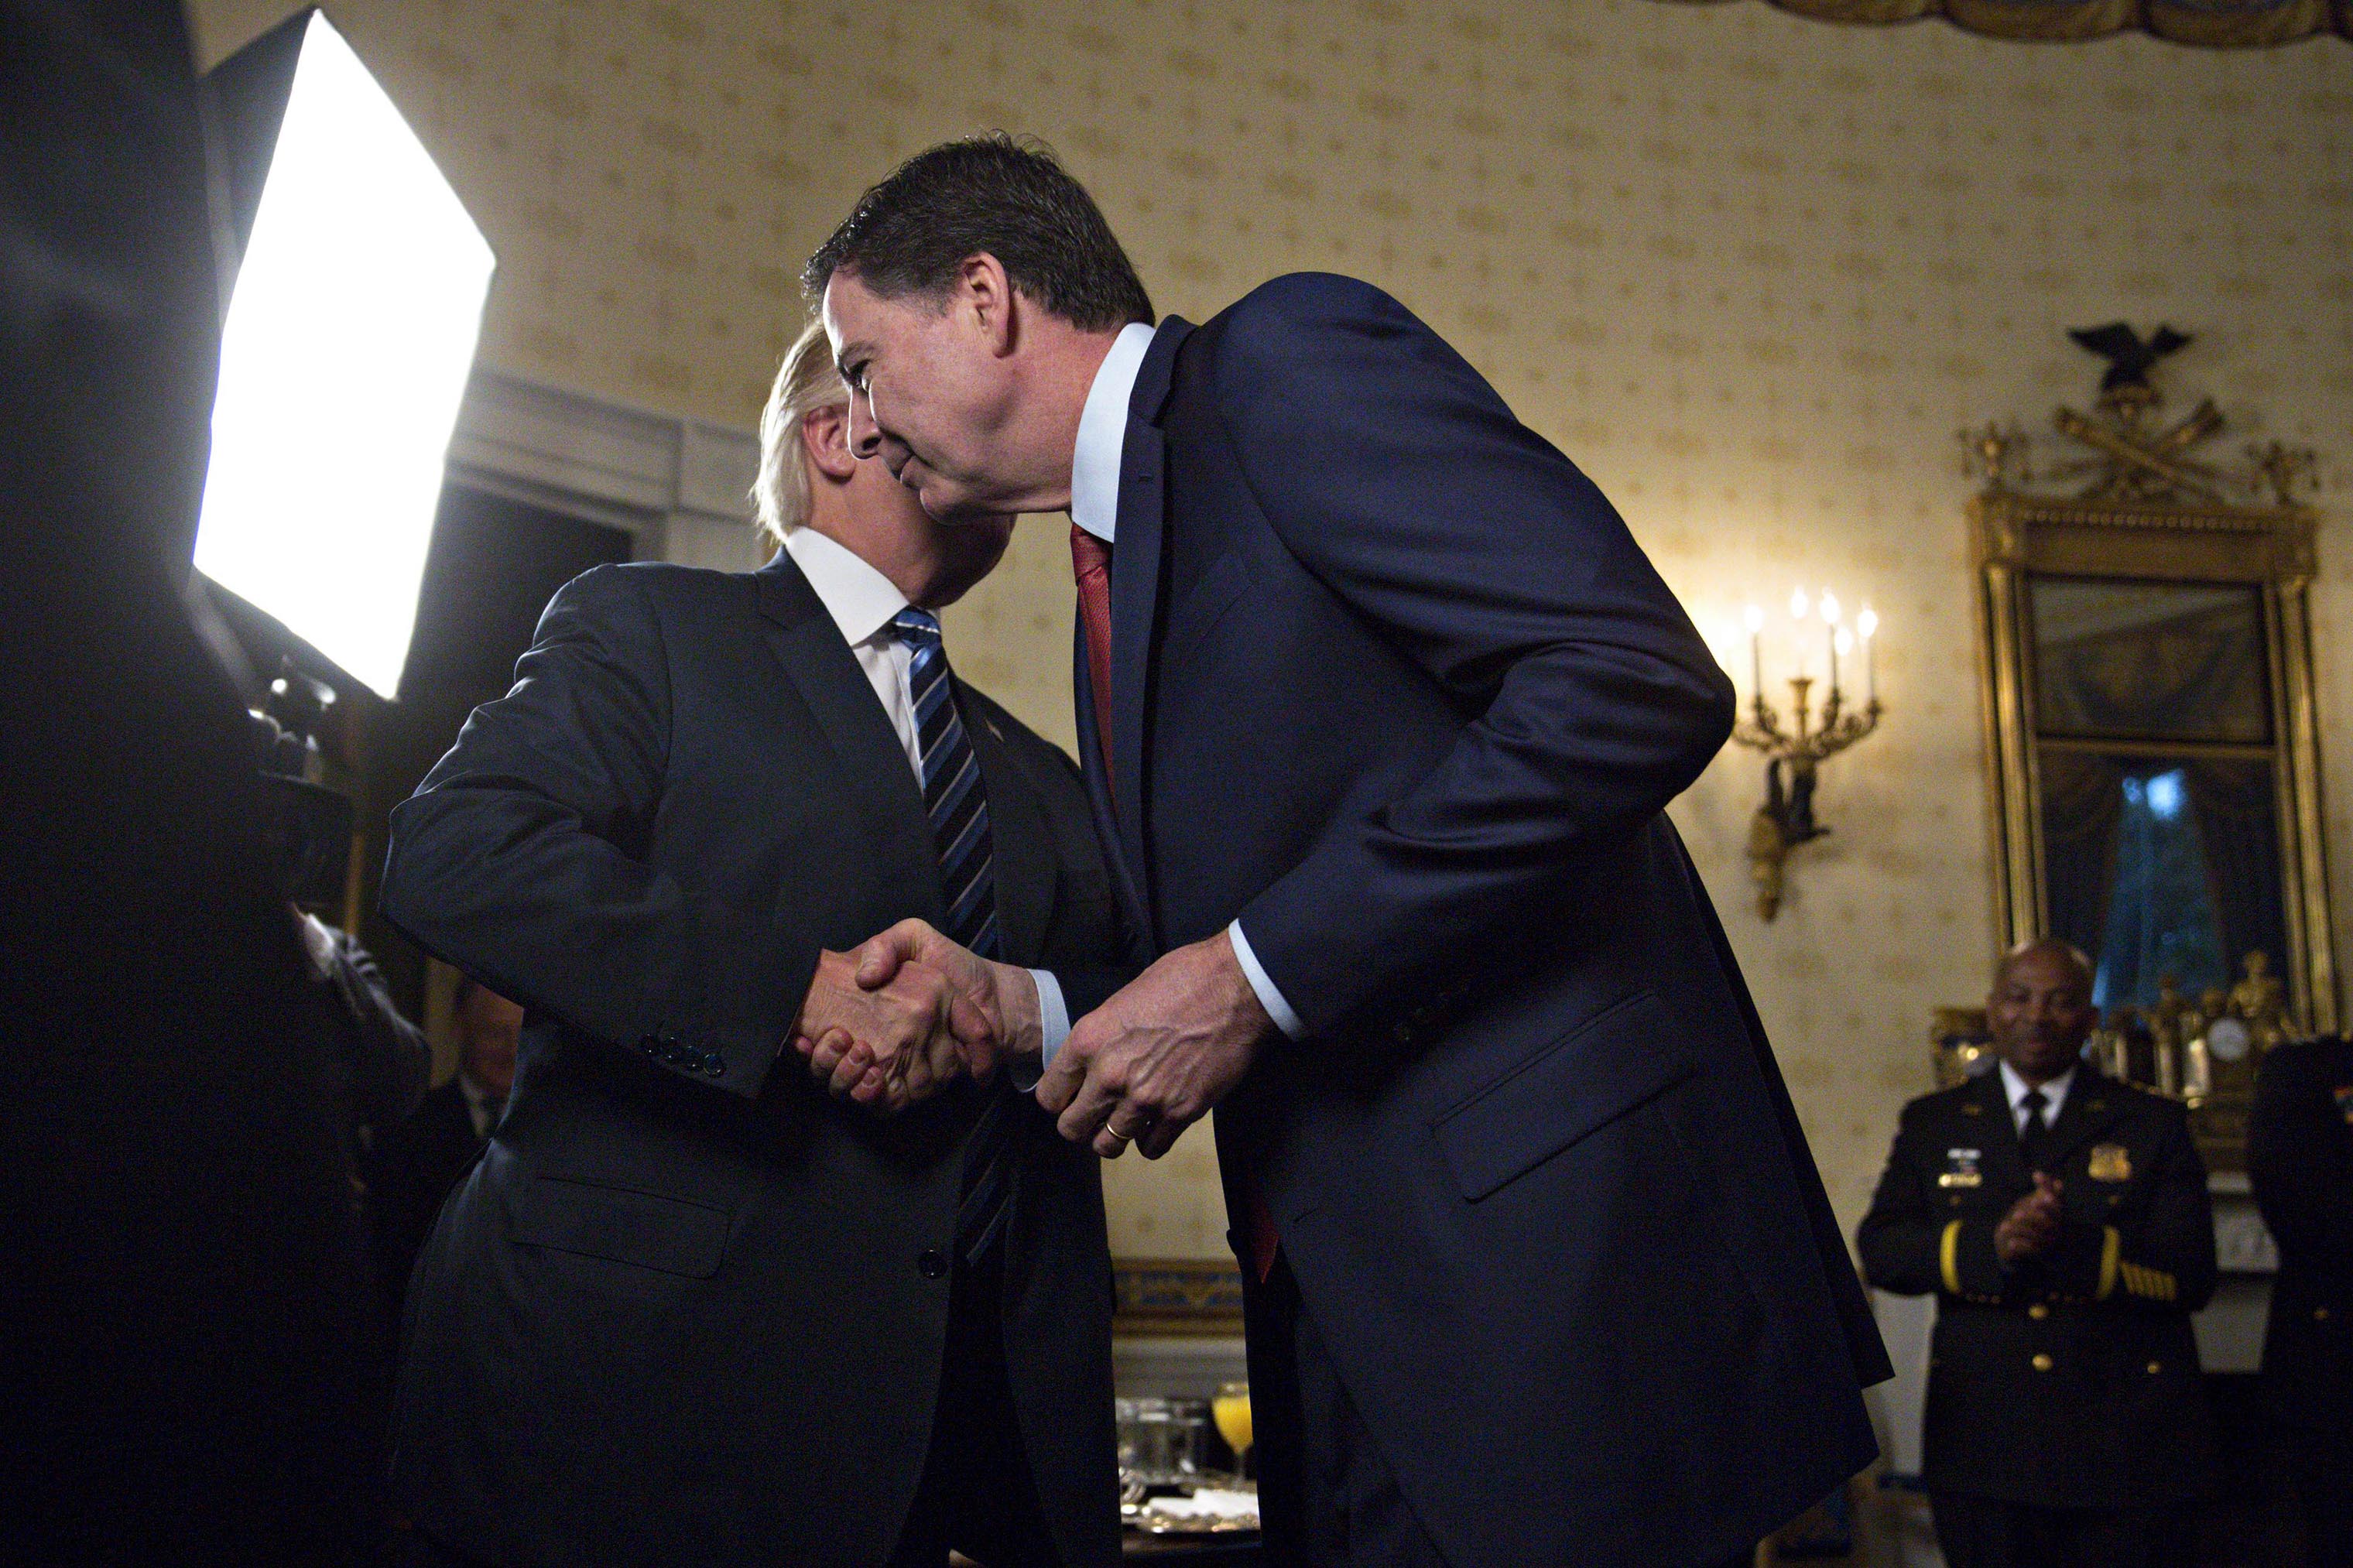 President Donald Trump shakes hands with James Comey, director of the FBI, during an Inaugural Law Enforcement Officers and First Responders Reception in the Blue Room of the White House on Jan. 22, 2017. (Andrew Harrer—Bloomberg)